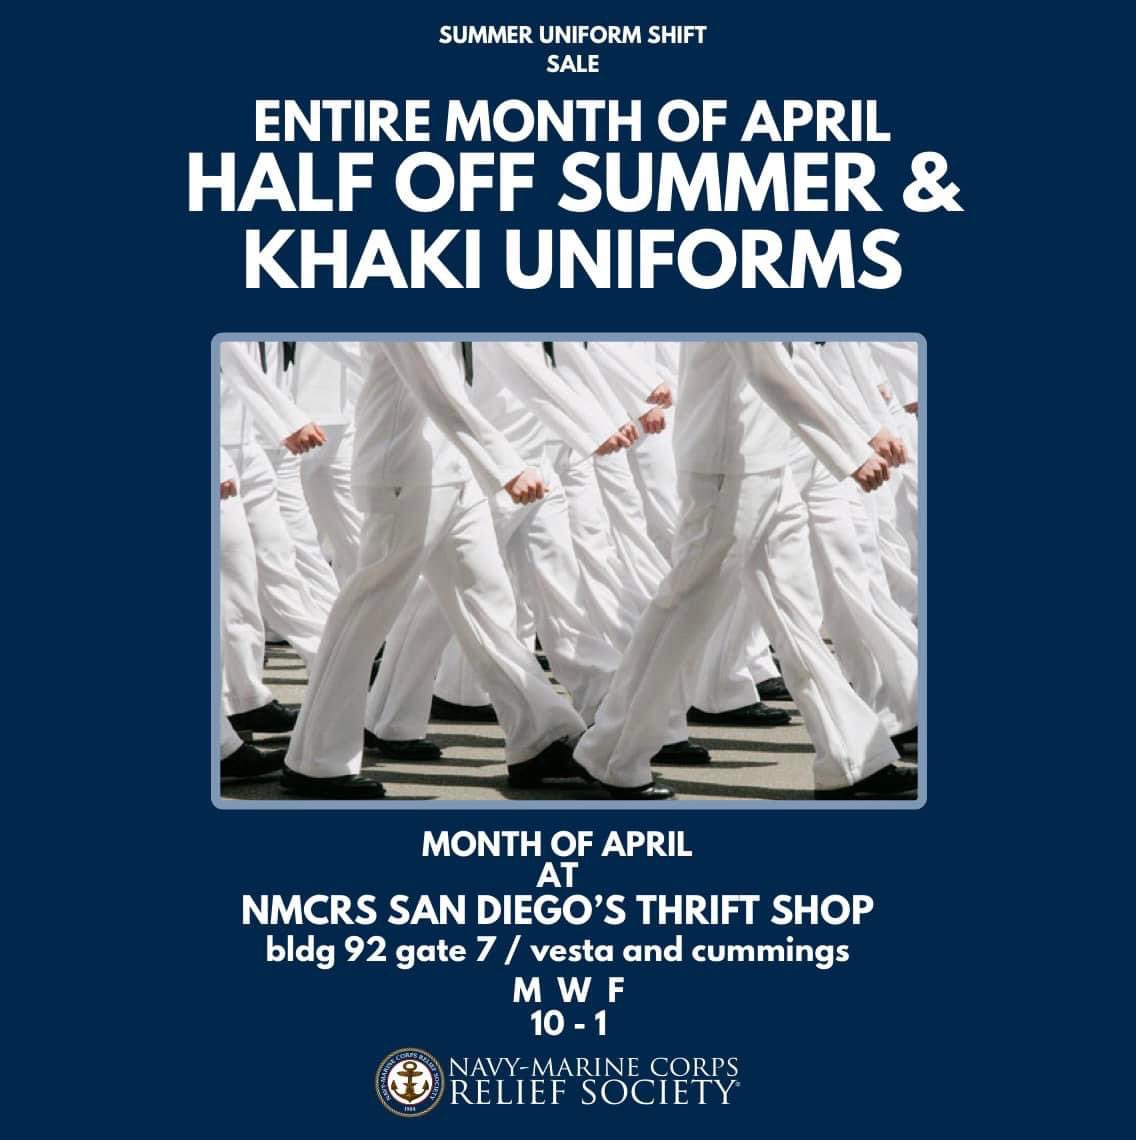 Don’t forget to stop by today and shop our summer uniform shift sale!
Navy-Marine Corps Relief Society San Diego Thrift Shop
Bldg 92 Gate 7 / Vesta and Cummings
10am-1pm Monday, Wednesday, Friday 
#NMCRS #financialfreedom #militaryfamily #NavyReadiness #GetThrifty #ThriftShop